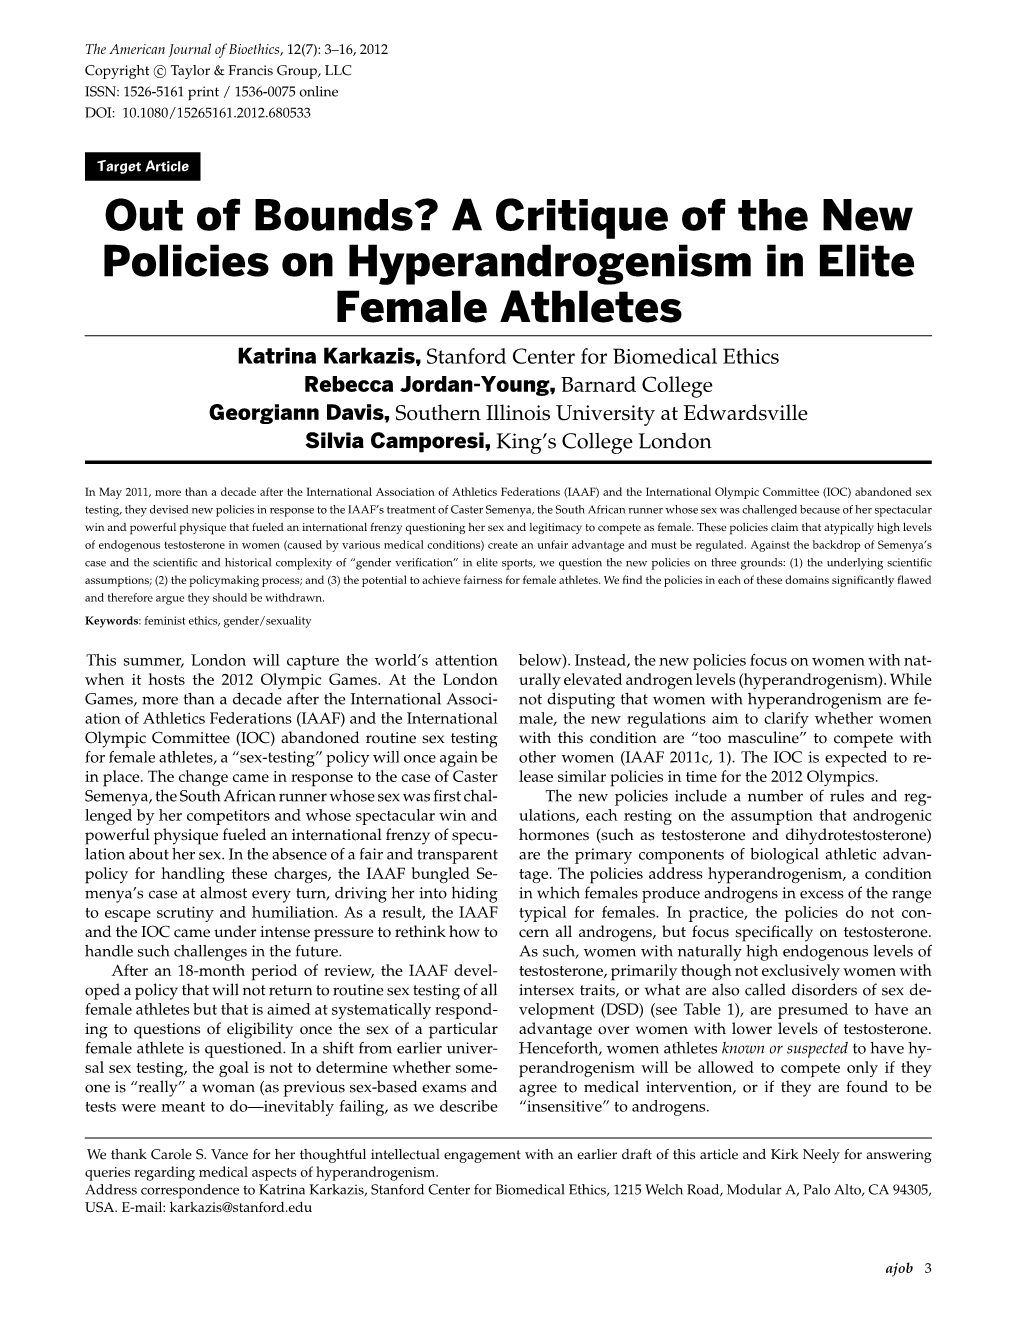 A Critique of the New Policies on Hyperandrogenism in Elite Female